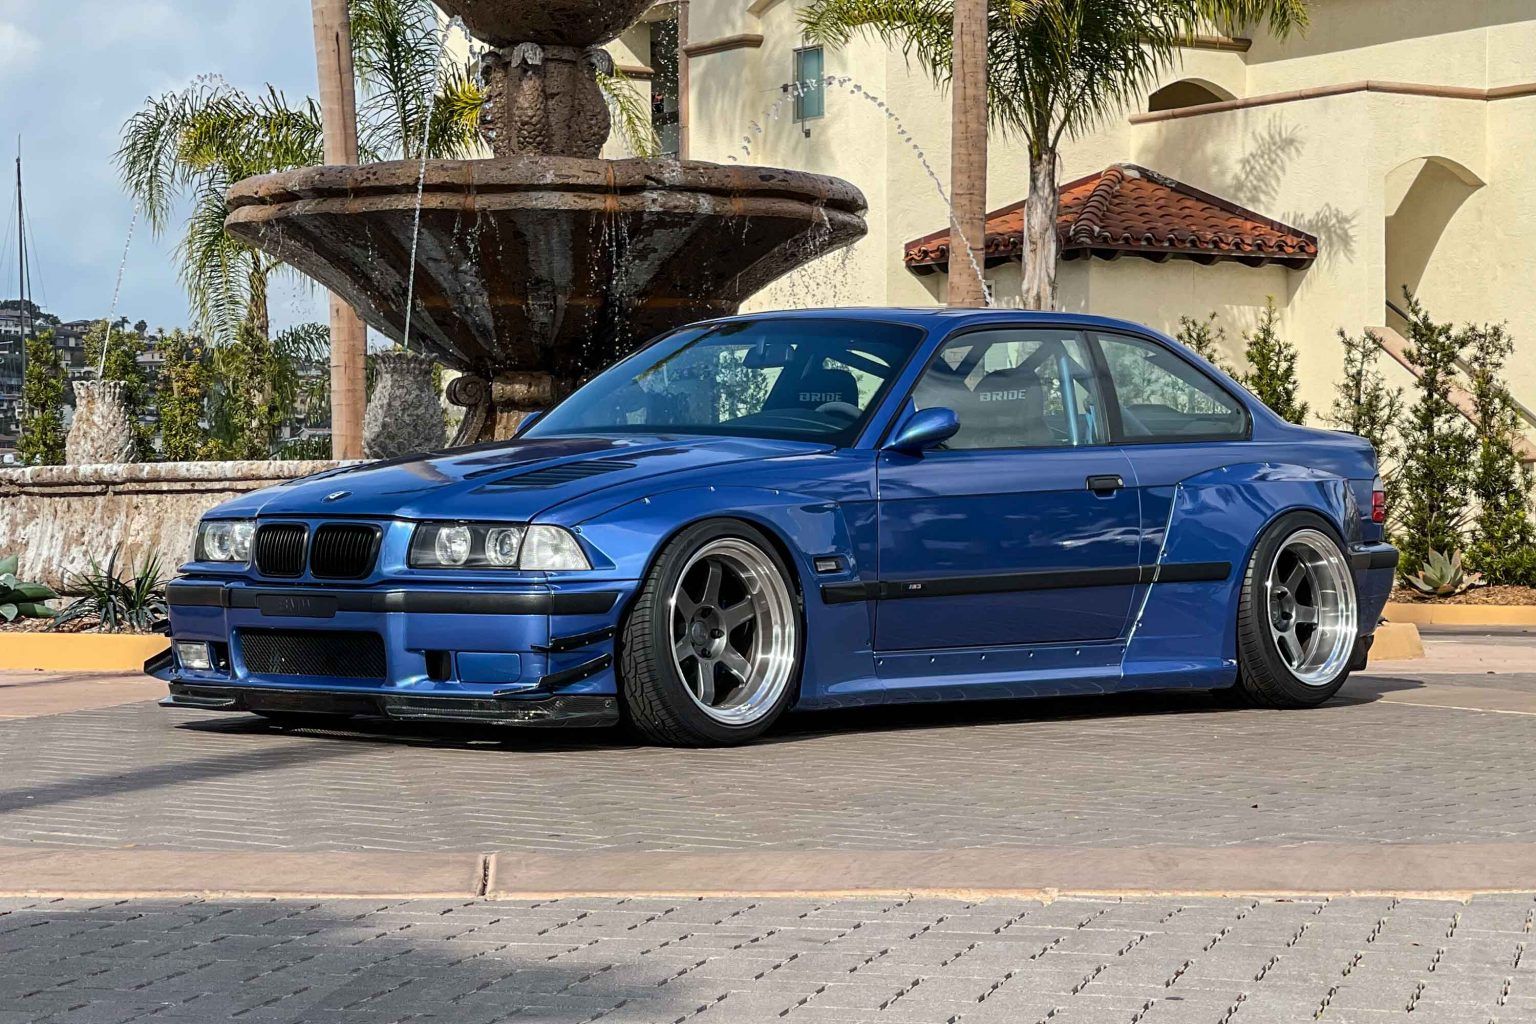  BMW E36  M3 Is A Head Turner Of A Different Breed